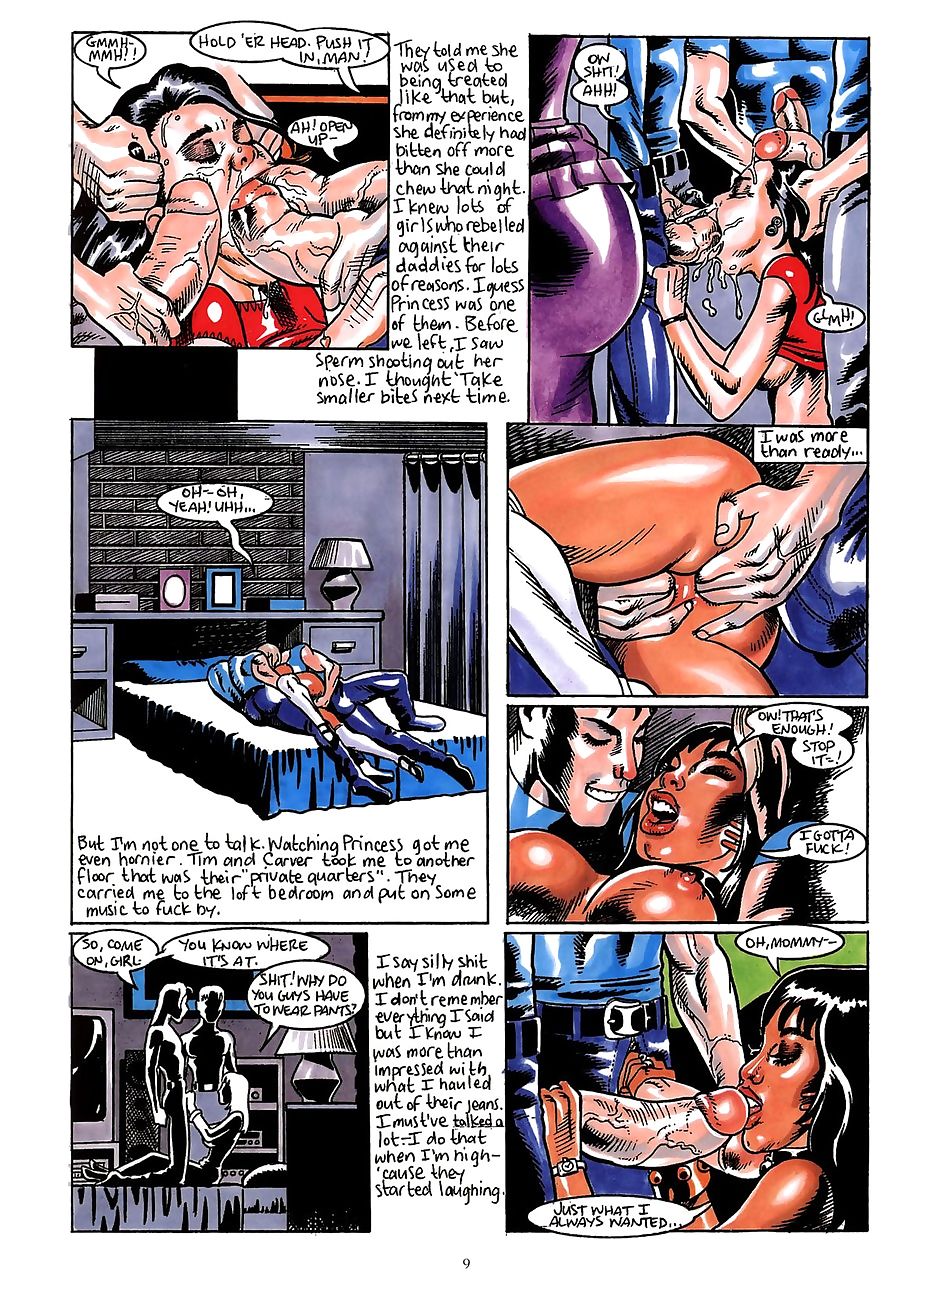 Body Heat 2 - part 4 page 1